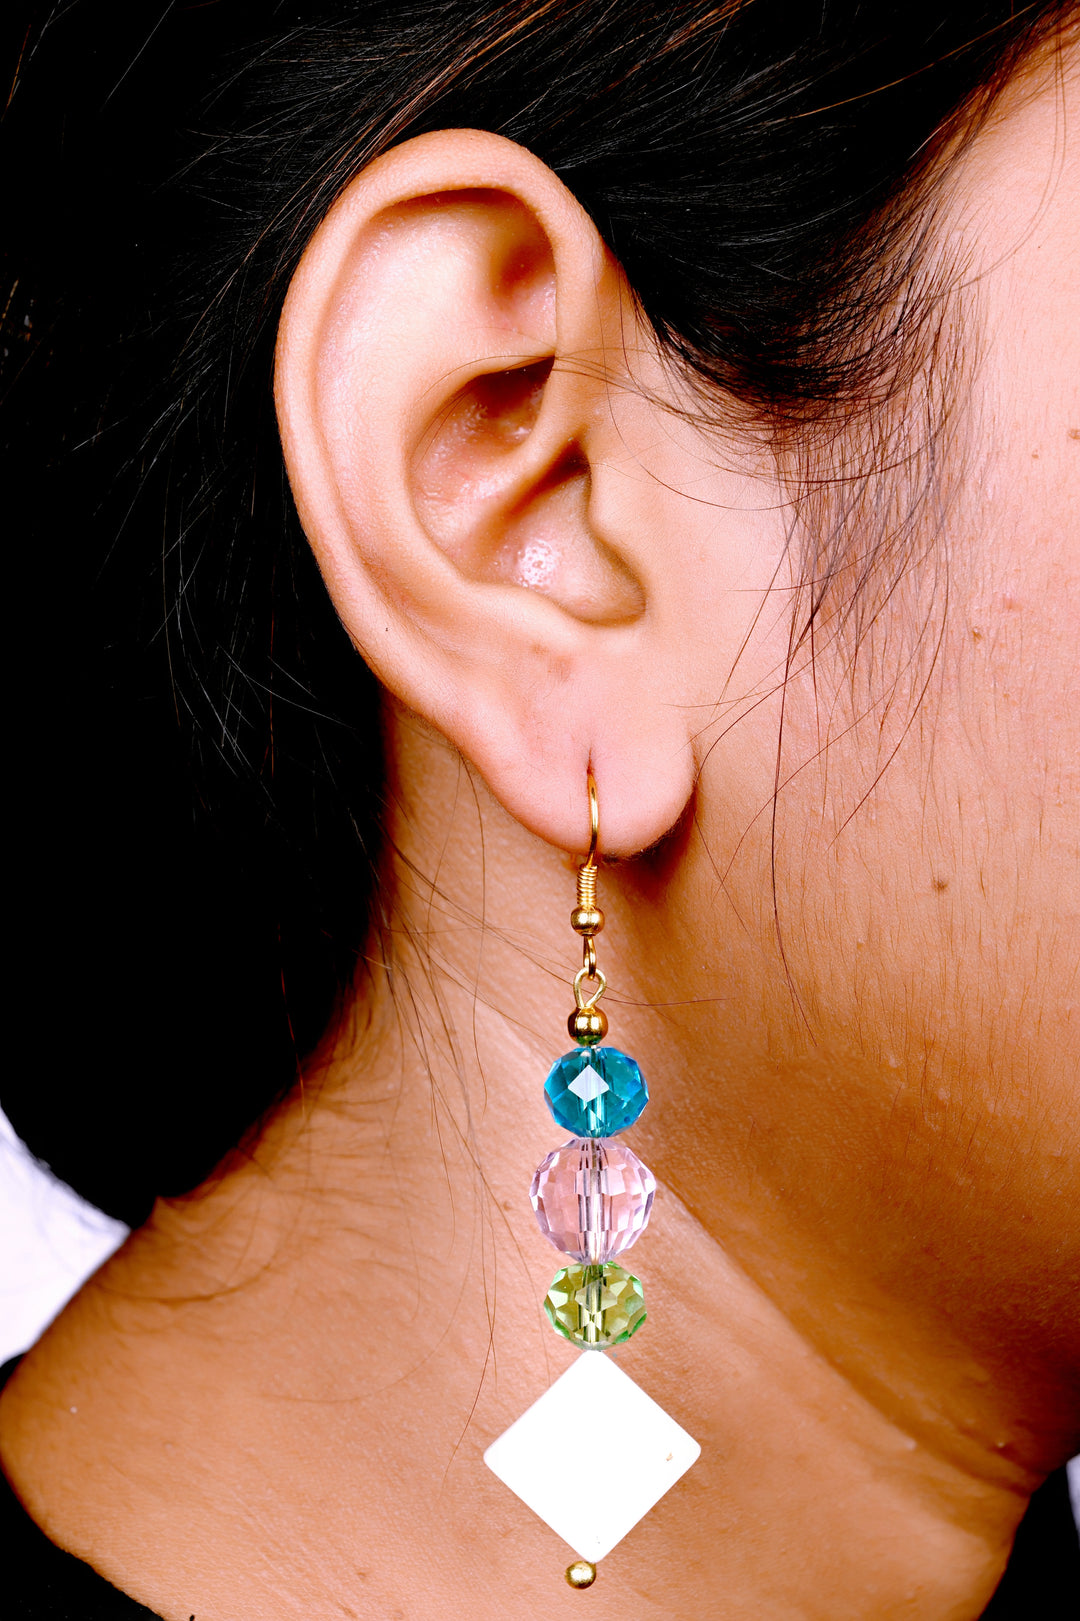 Beautiful Multi Faceted Glass Beads Earring Styled With Square Shaped Shell Beads